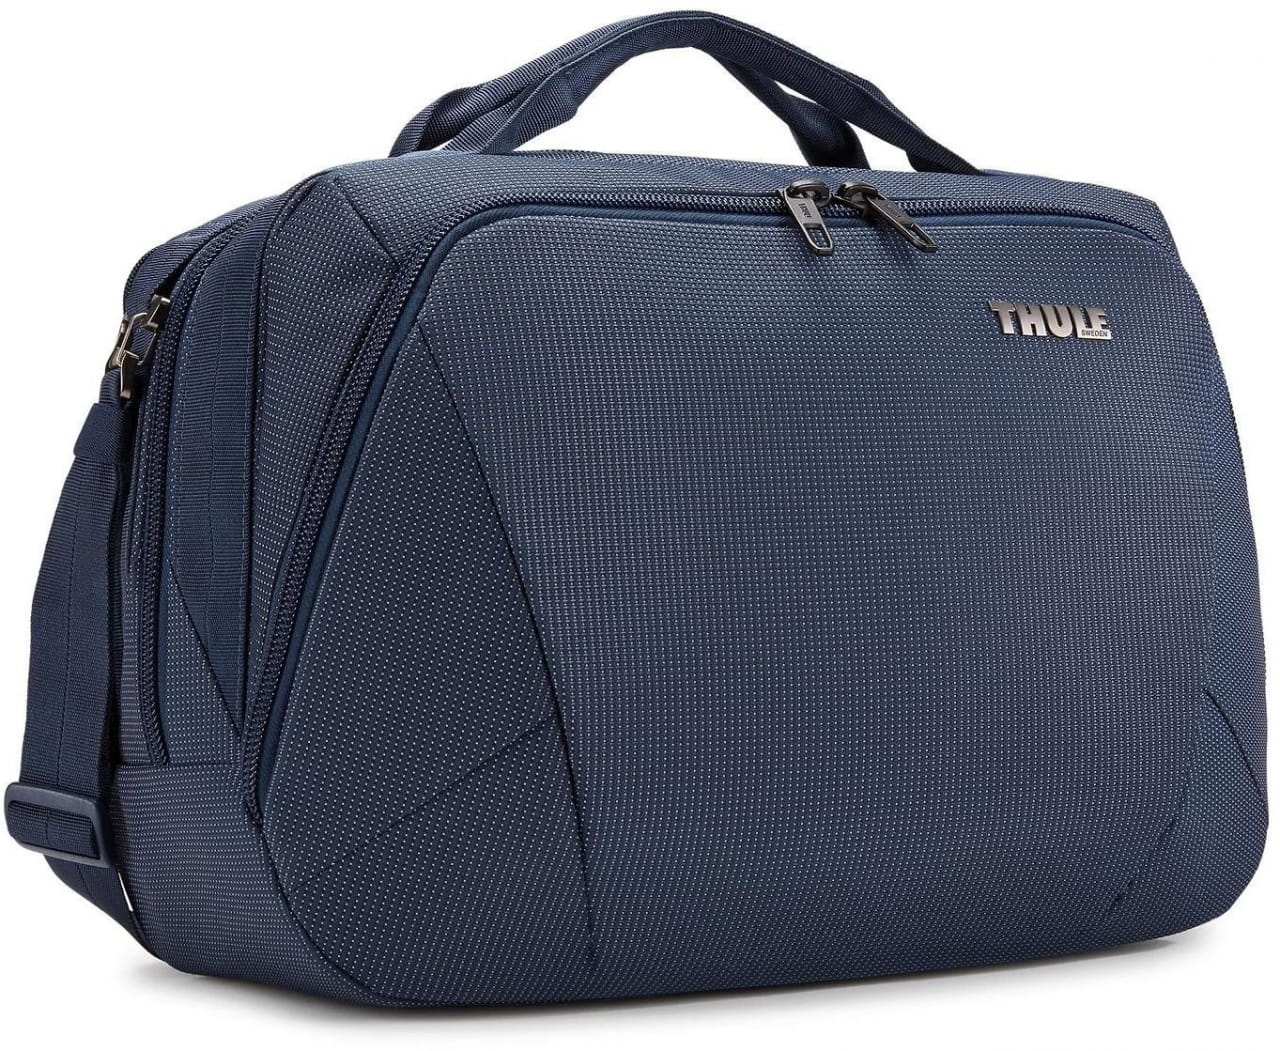 Bagages de cabine Thule Crossover 2